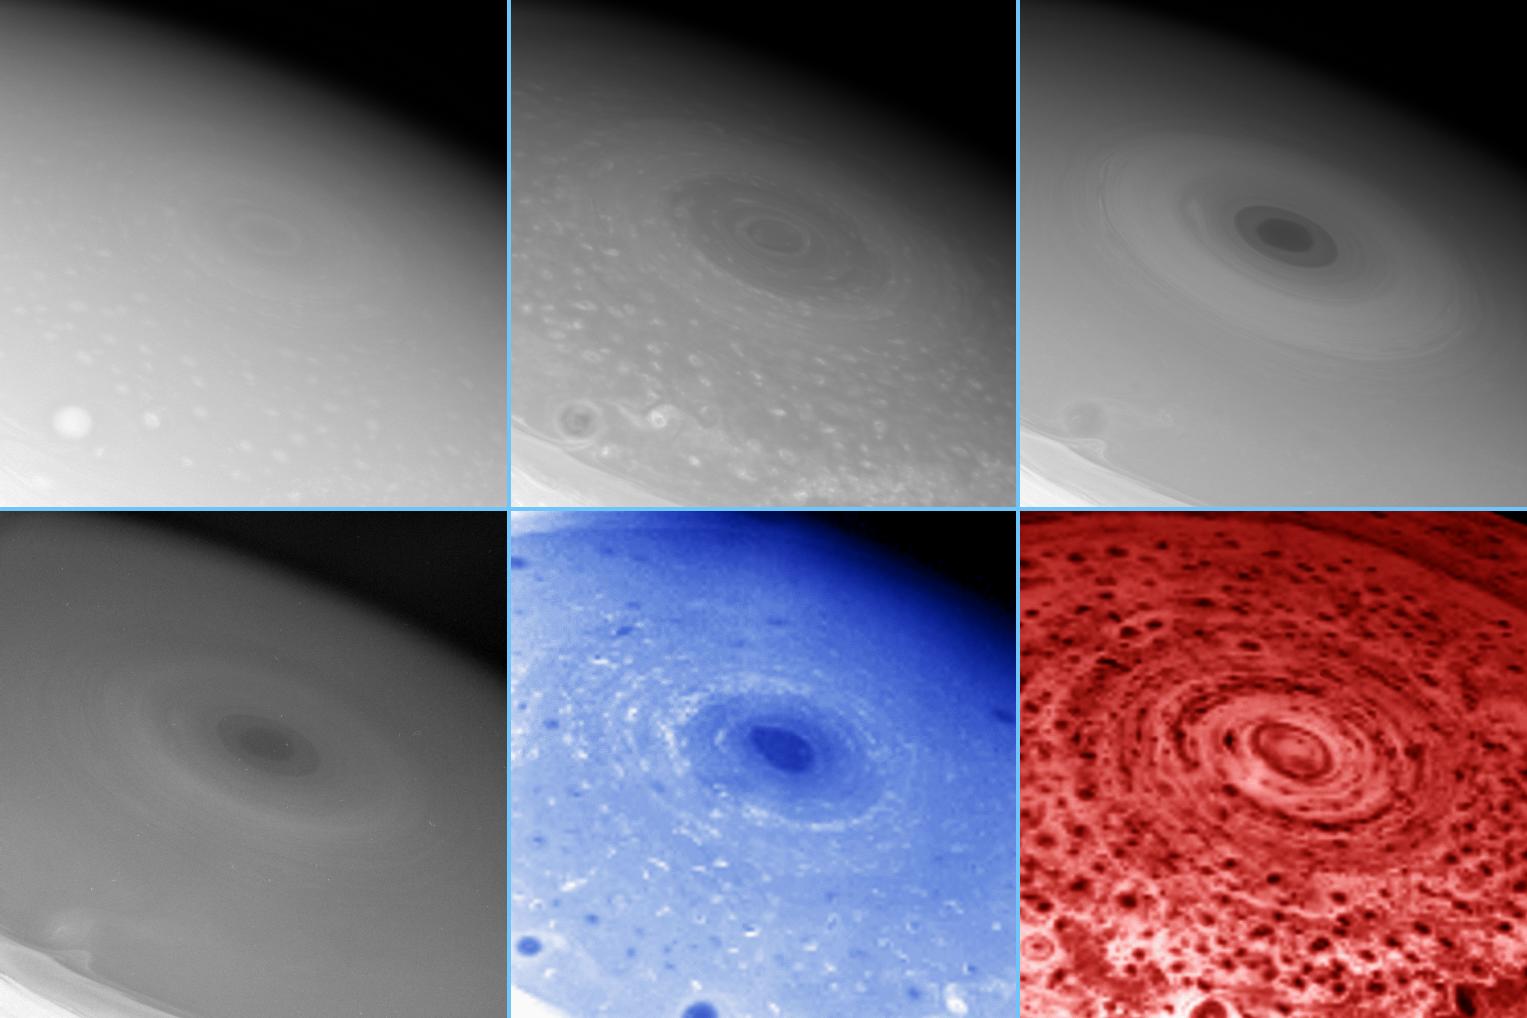 Images of Saturn's south pole